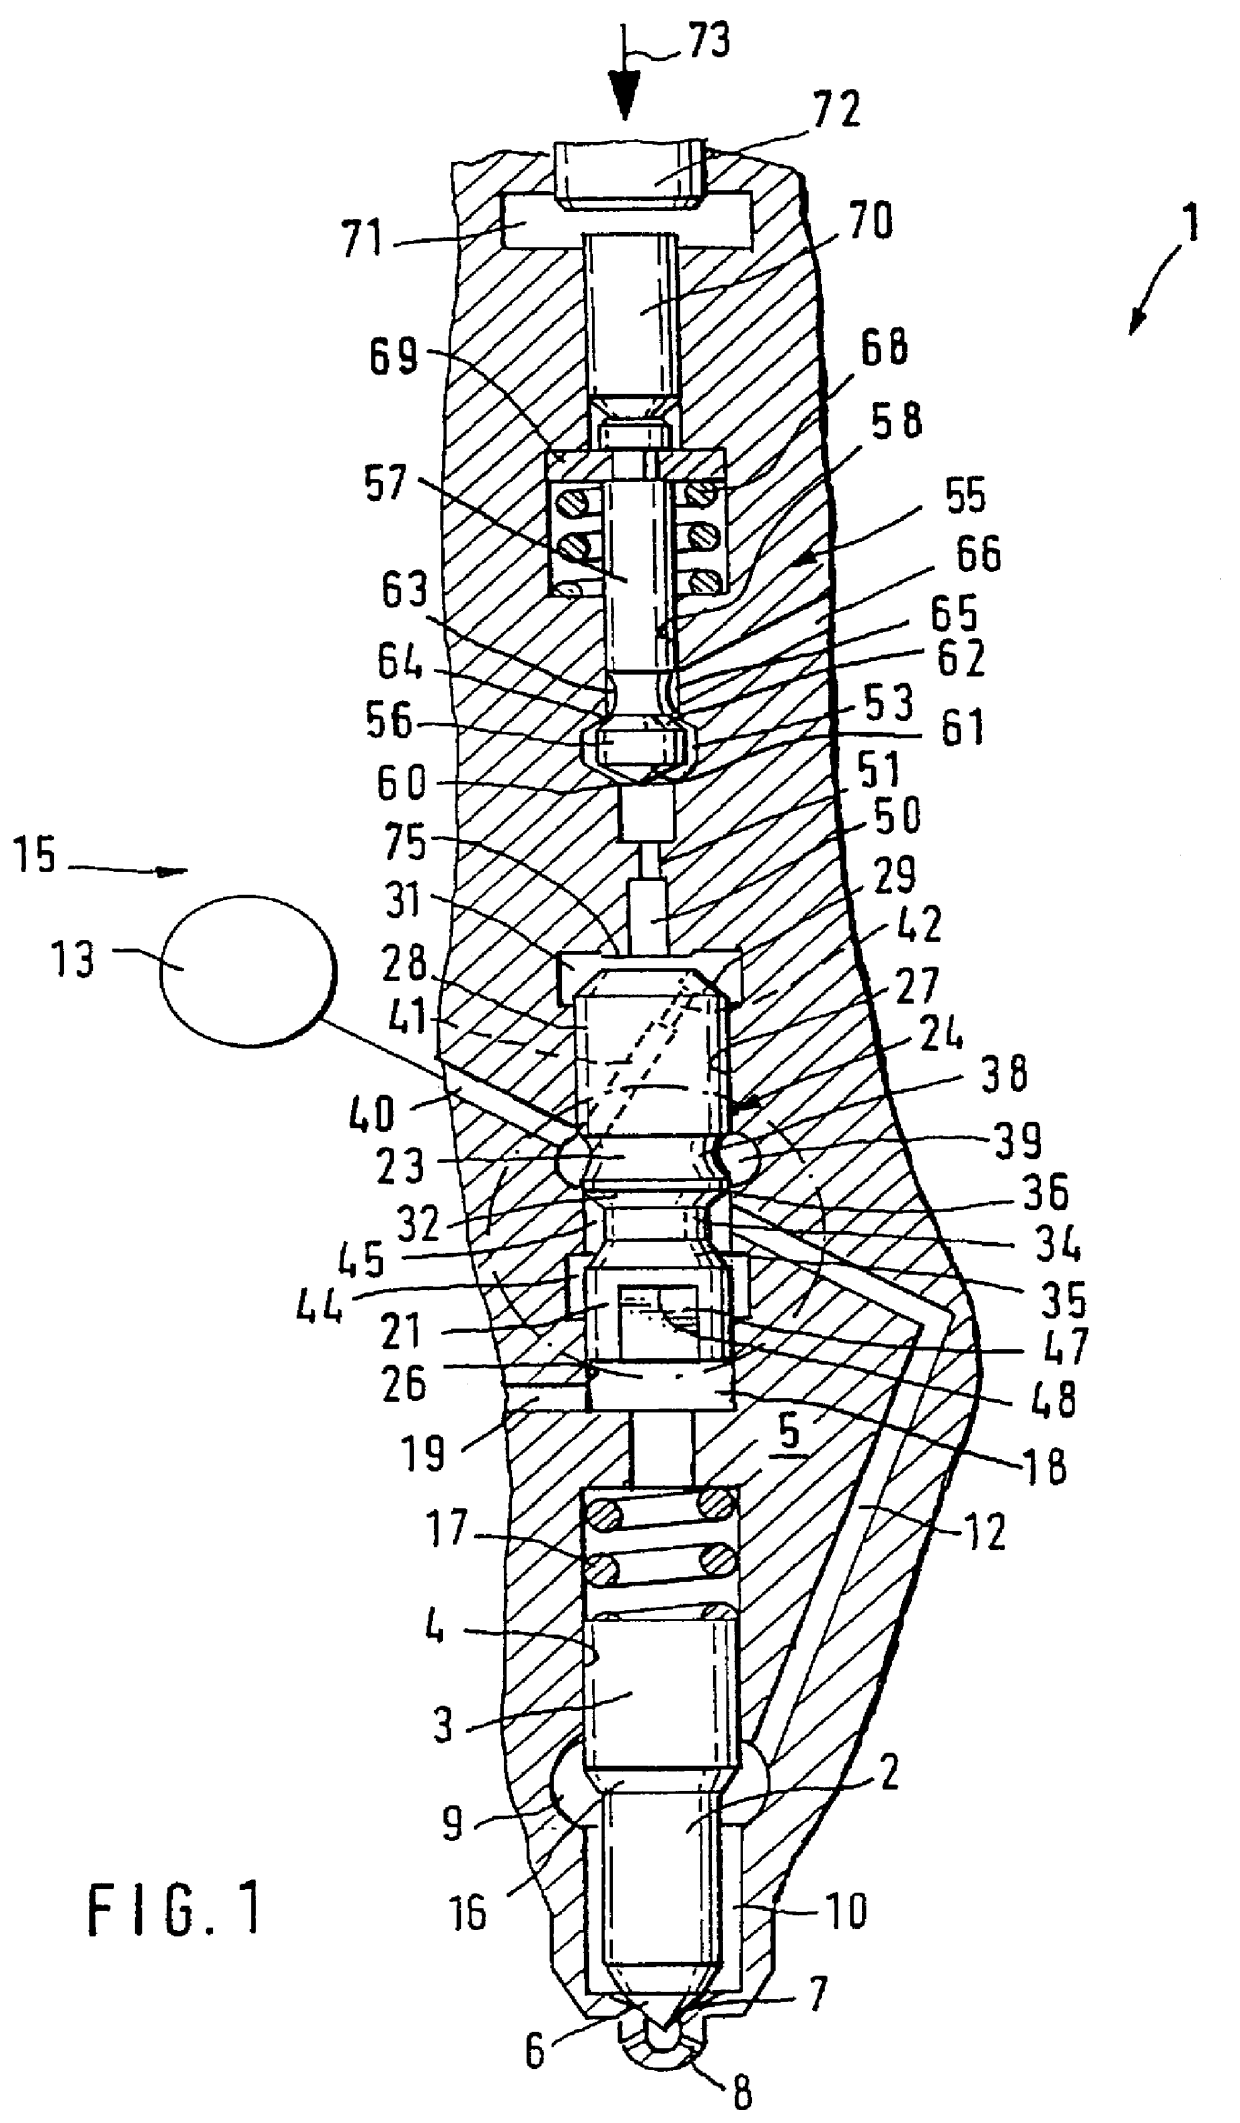 Fuel injection device for internal combustion engines